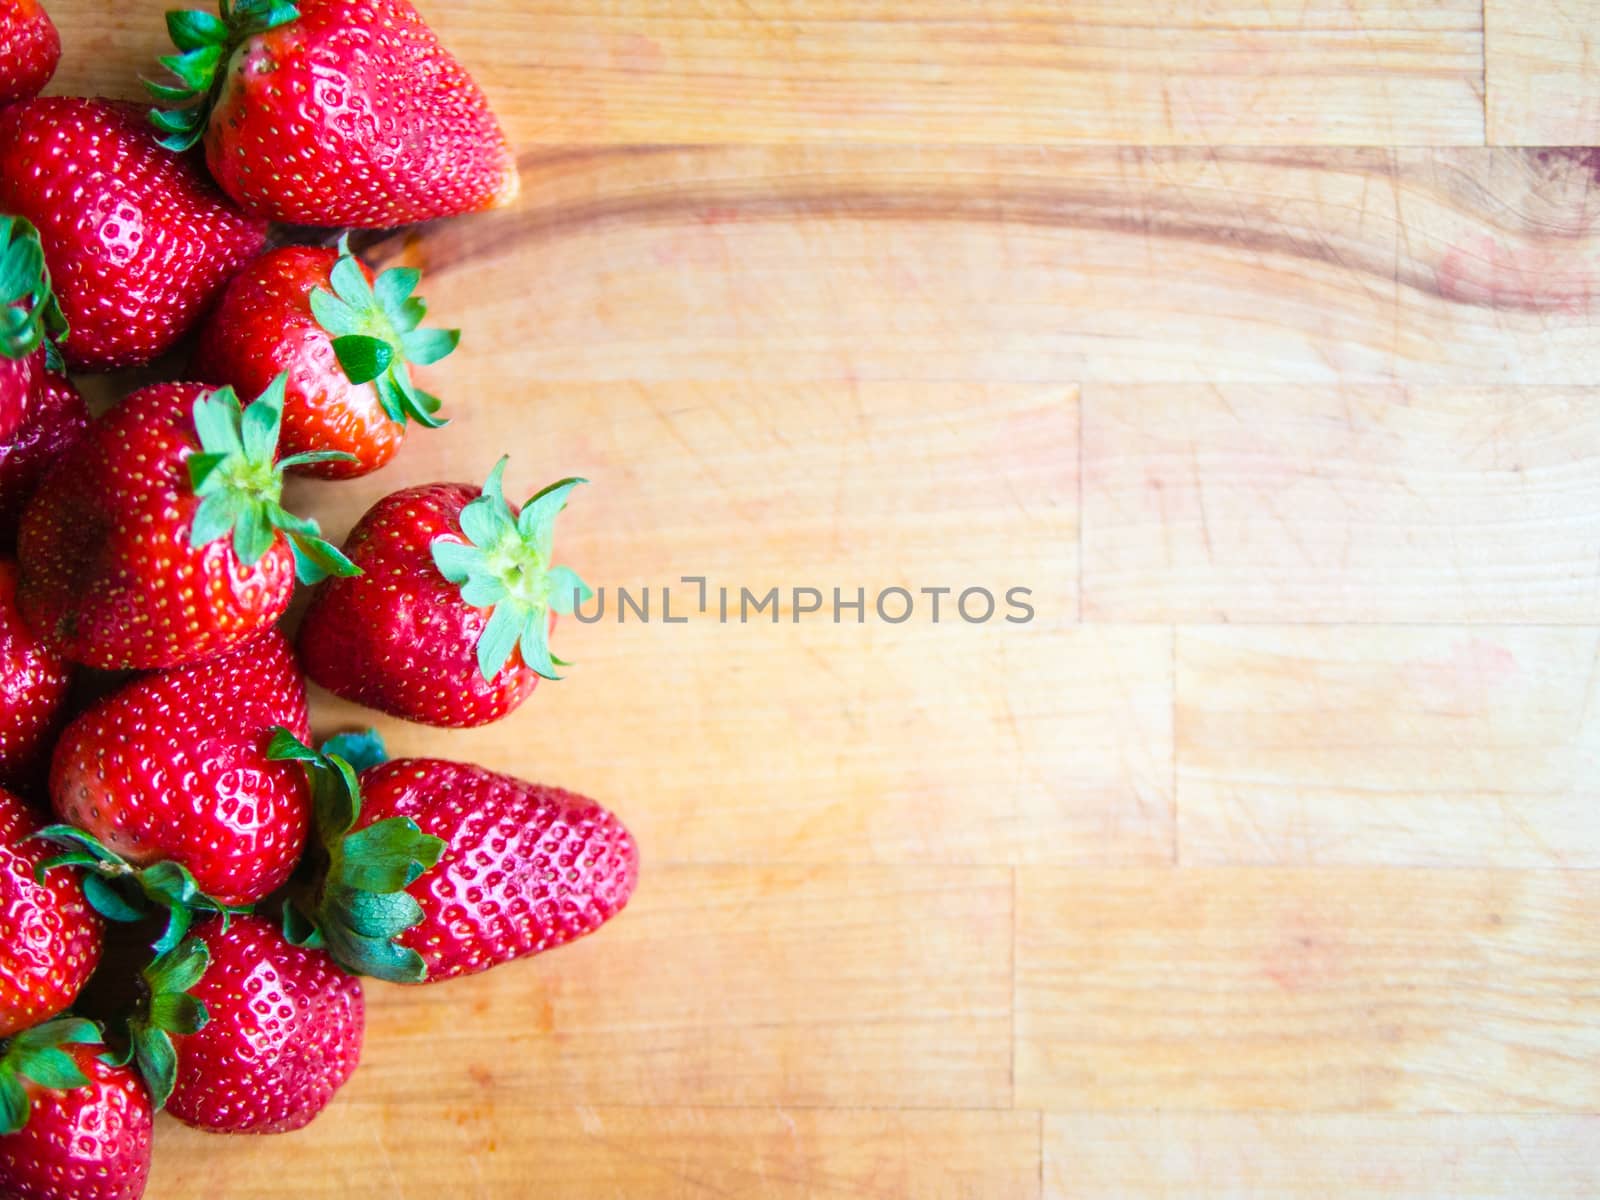 Strawberries on a wooden board with empty space by weruskak